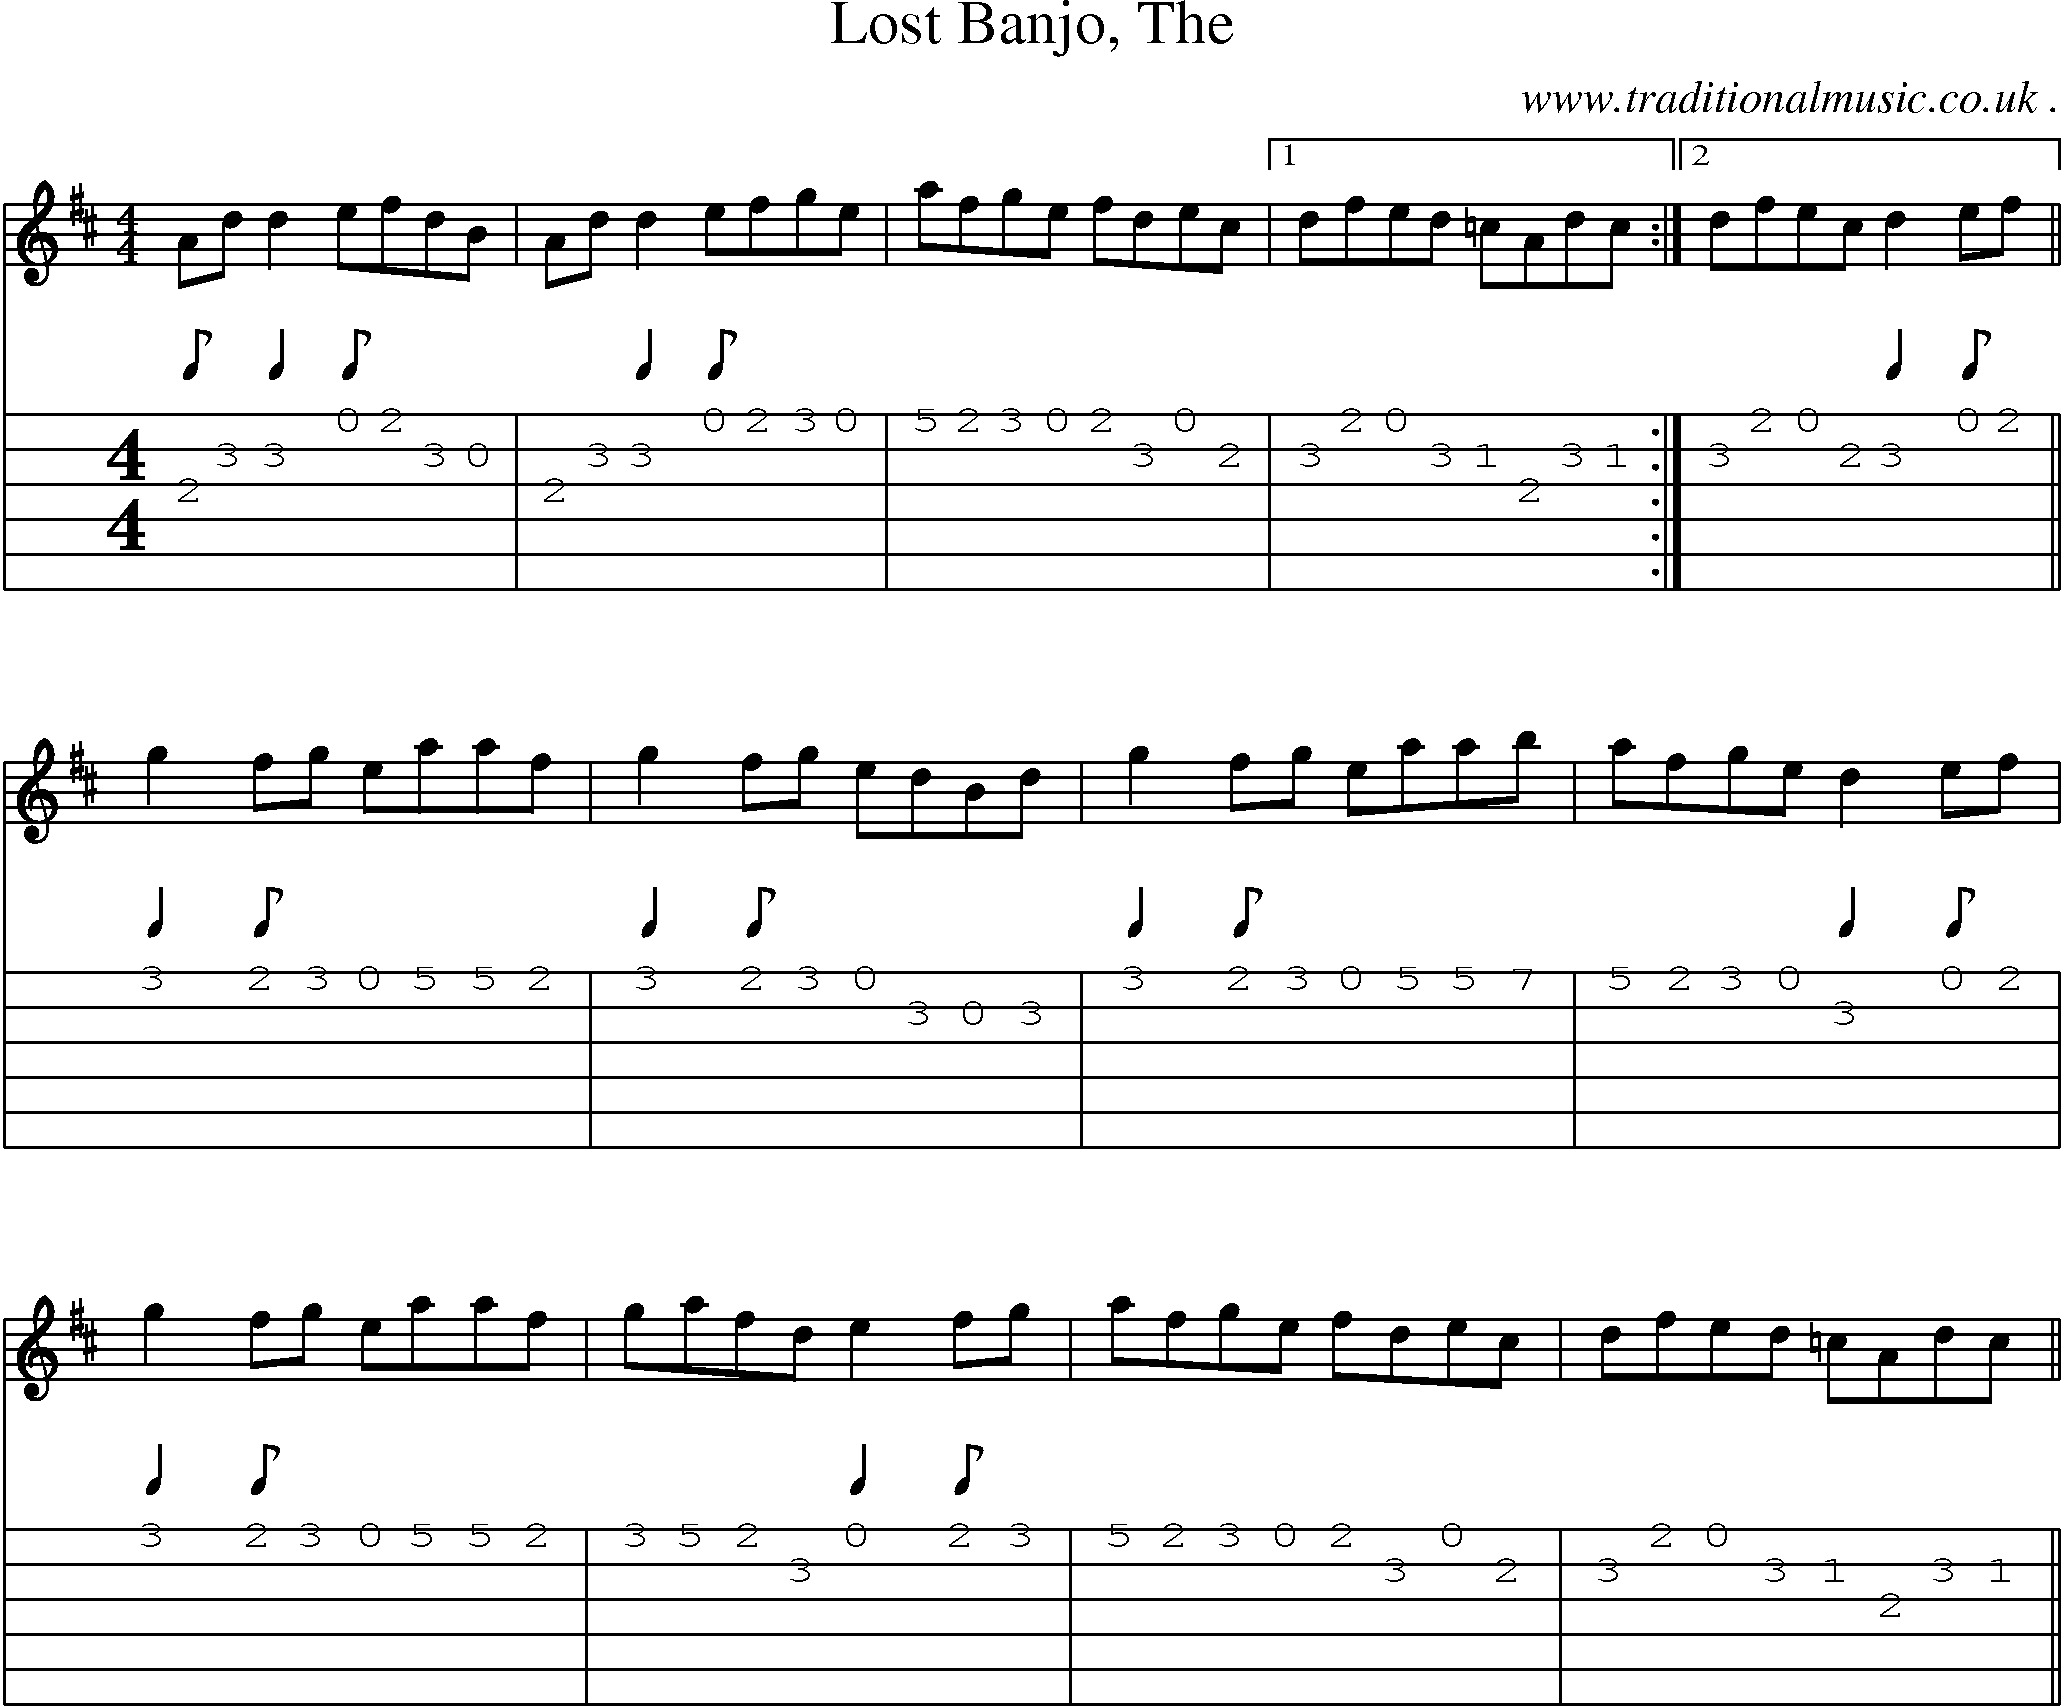 Music Score and Guitar Tabs for Lost Banjo The